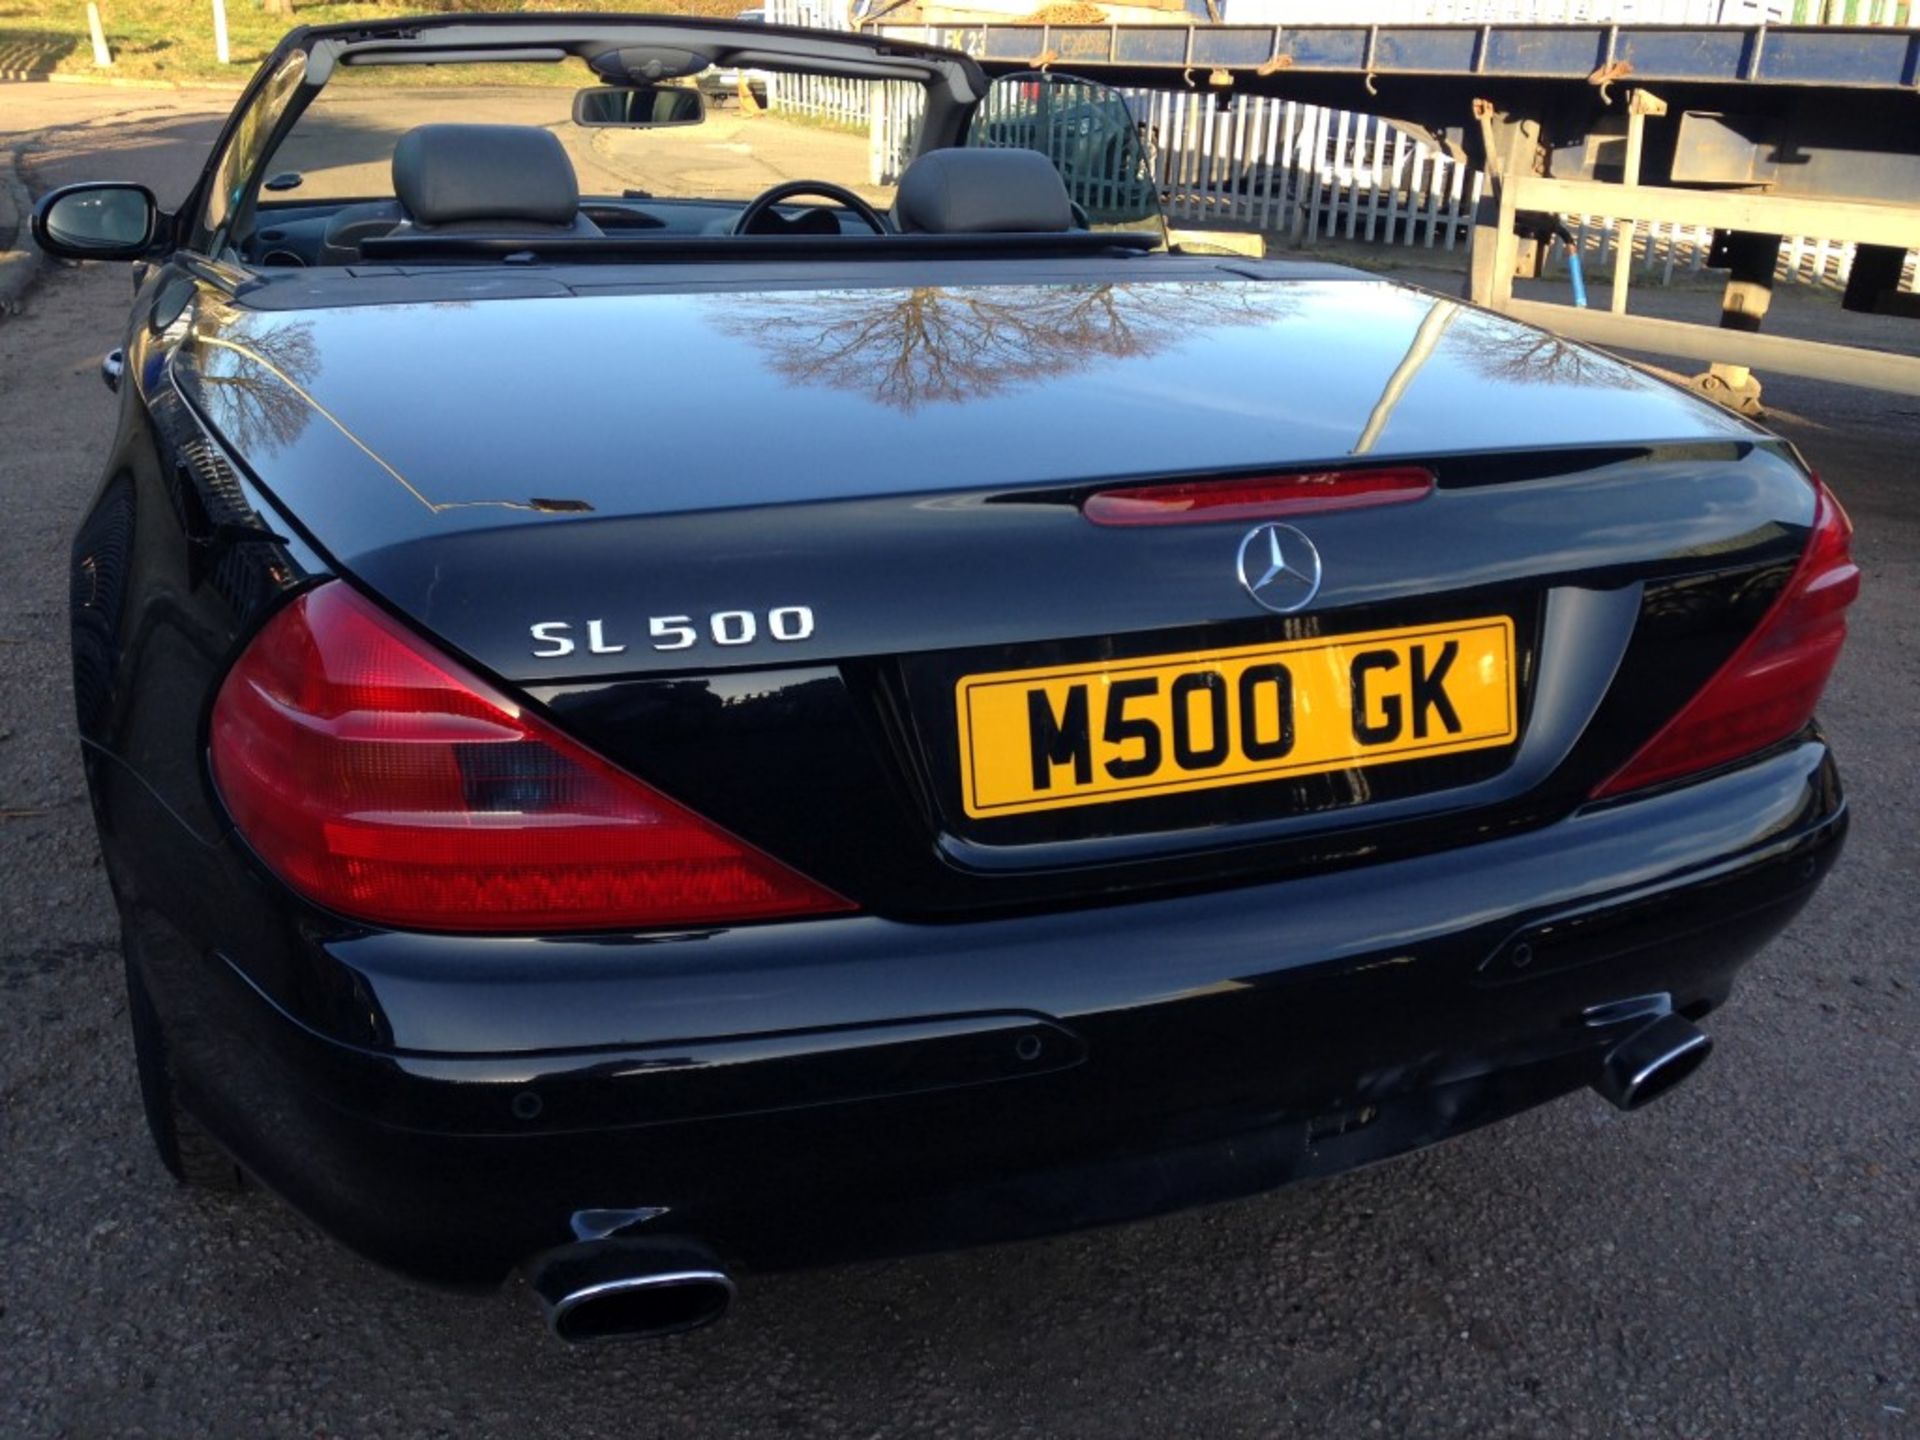 1 x Mercedes SL500 Automatic 5.0 Convertible - Petrol - Year 2002 - 94,500 Miles - Long MOT Expiry - Image 31 of 31